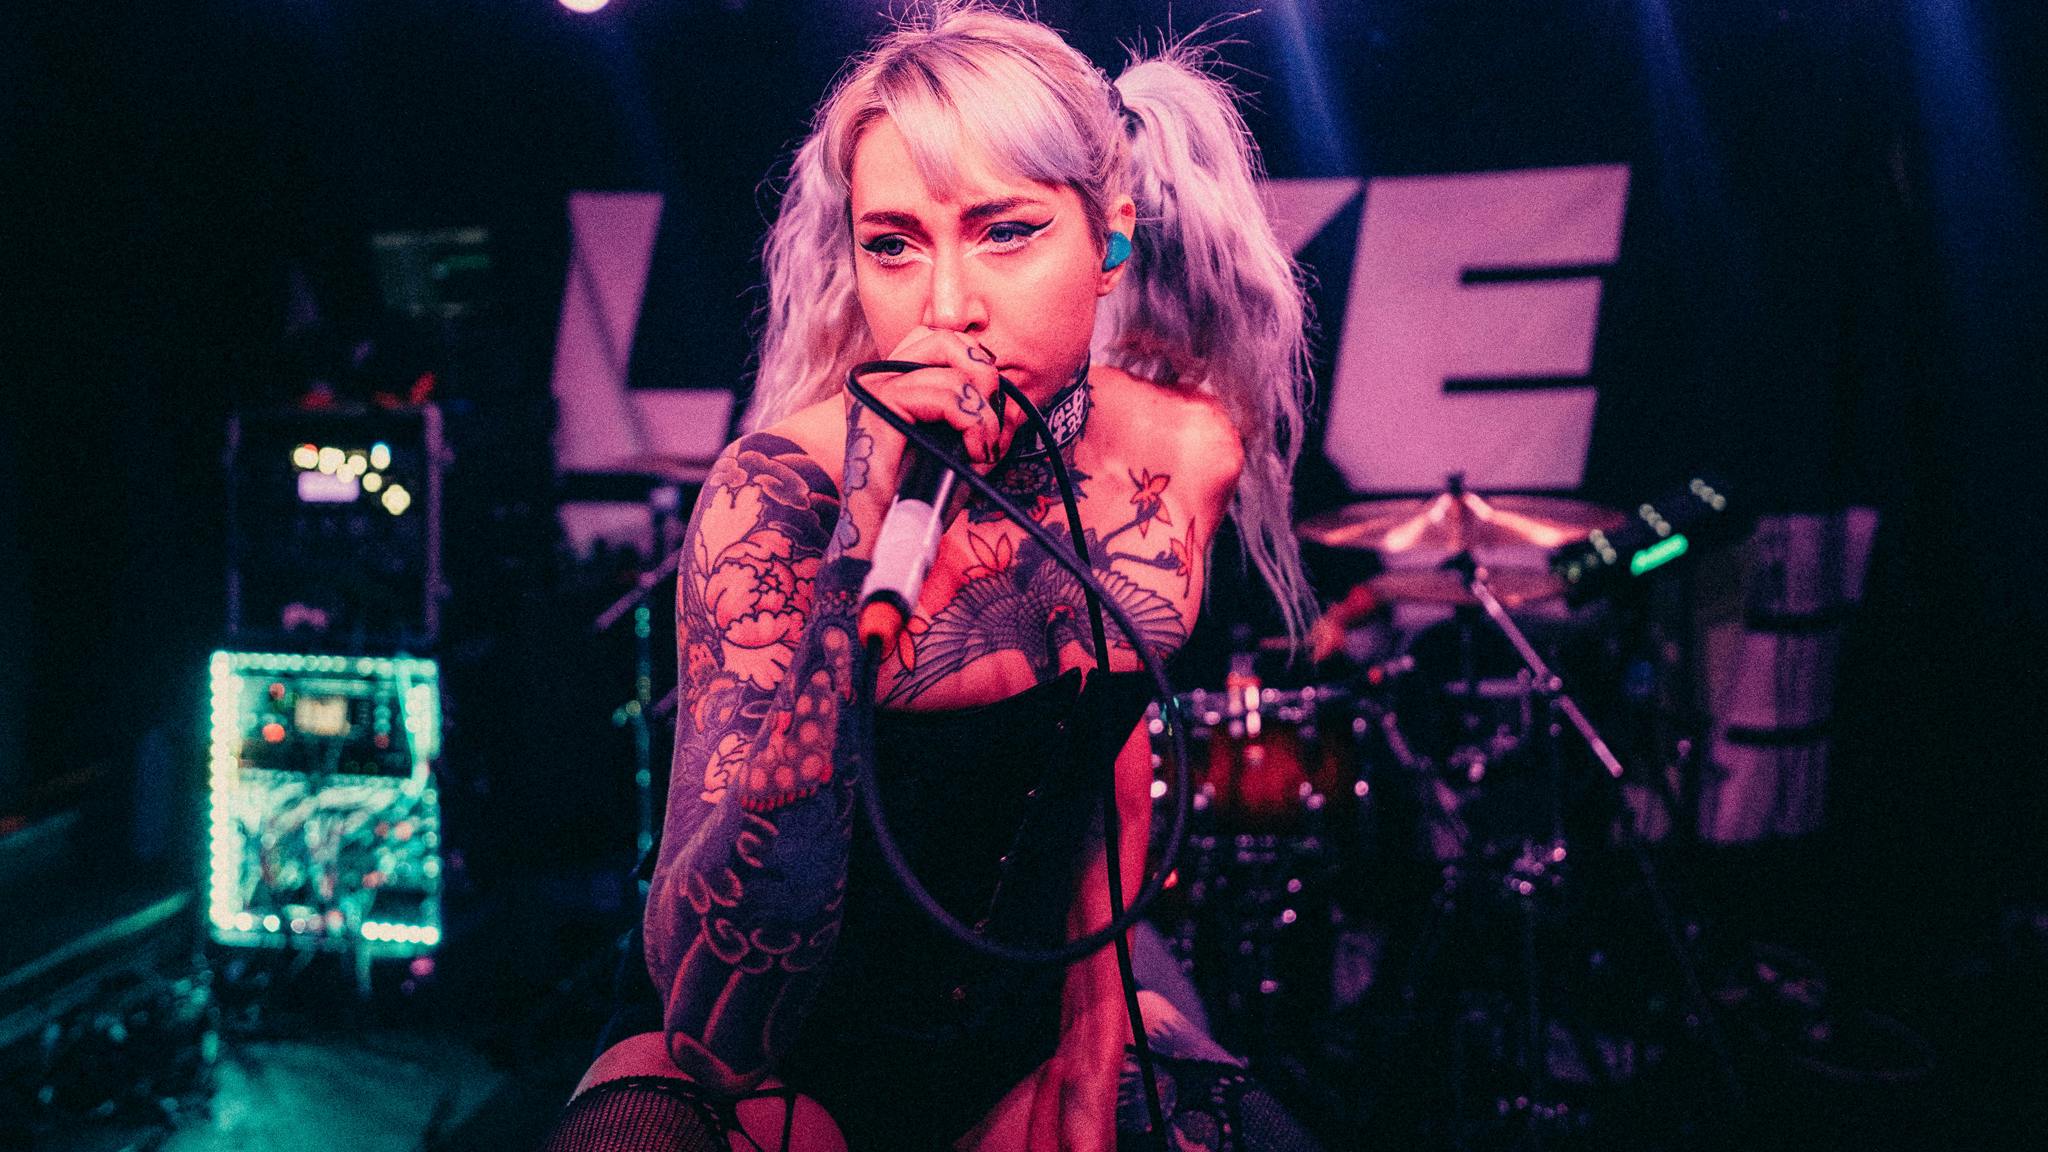 In pictures: Lake Malice’s first-ever UK headline show